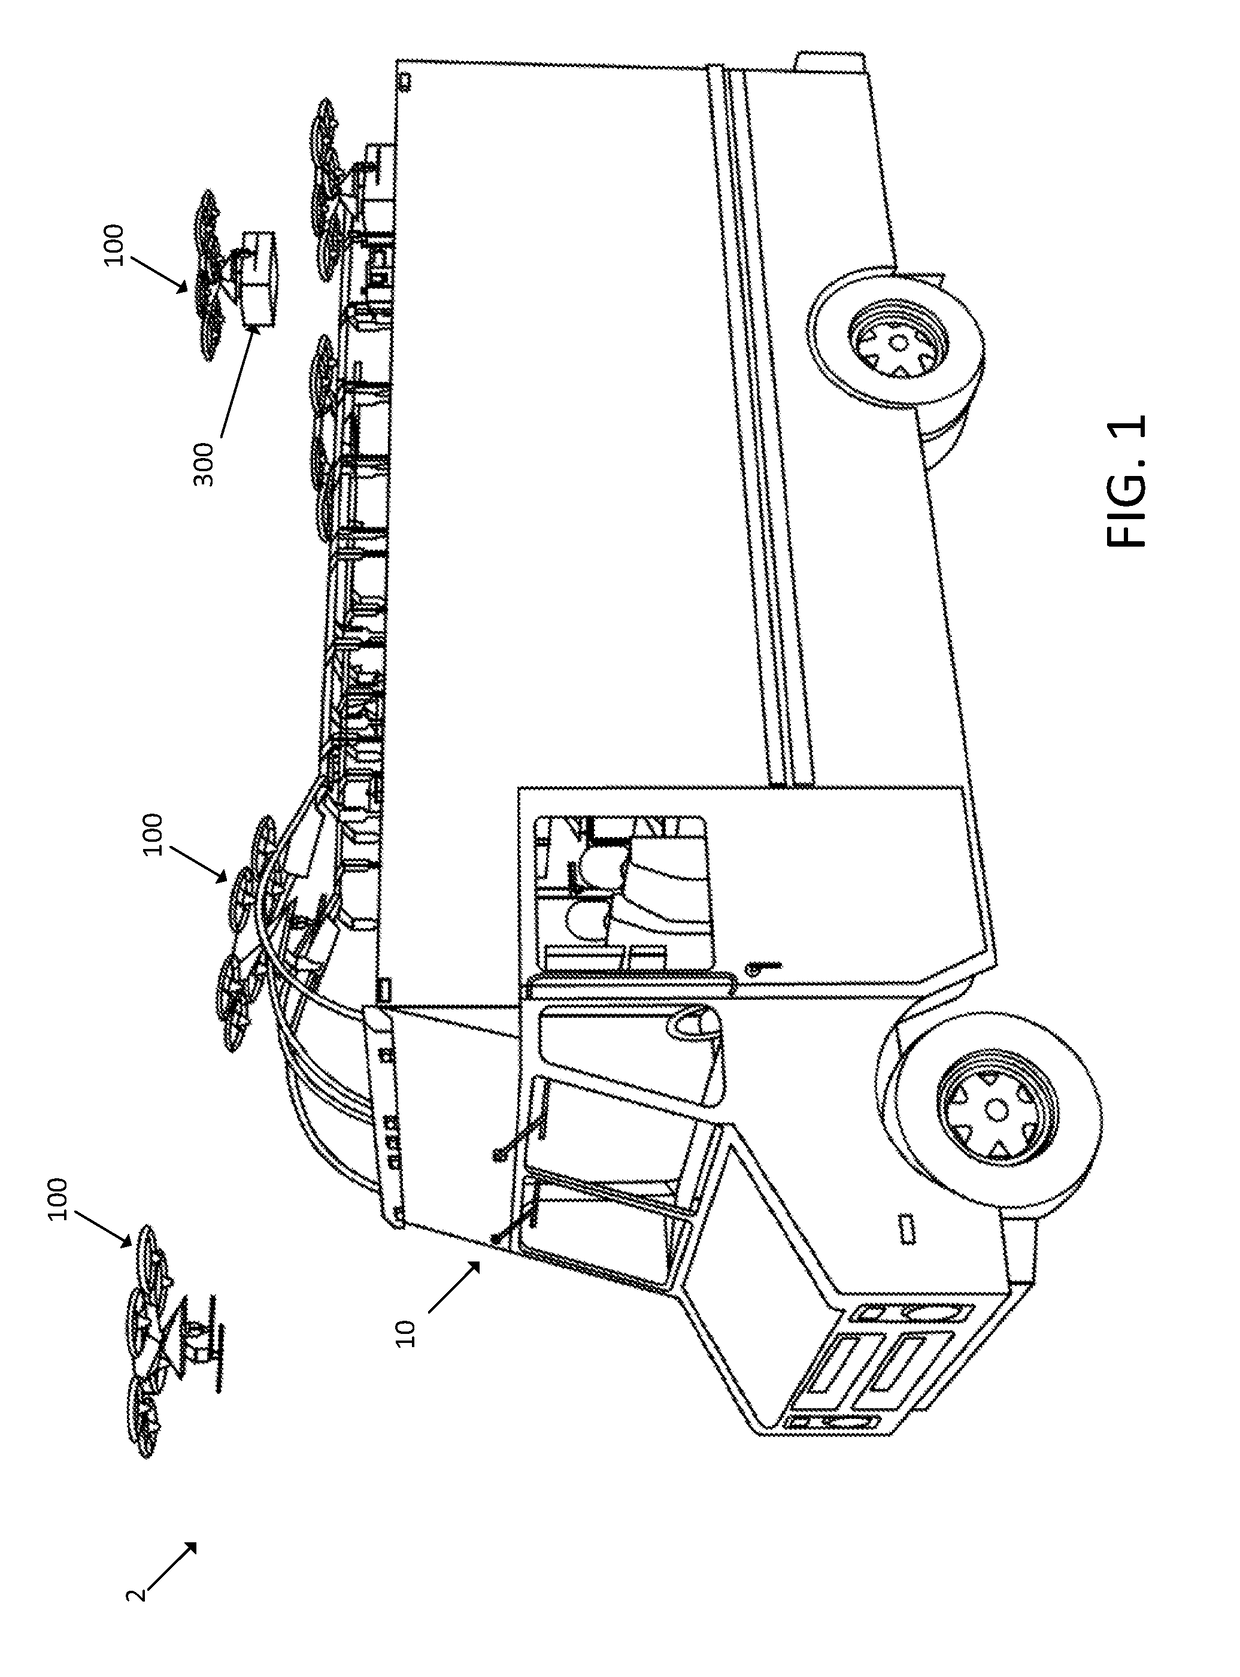 Methods for dispatching unmanned aerial delivery vehicles